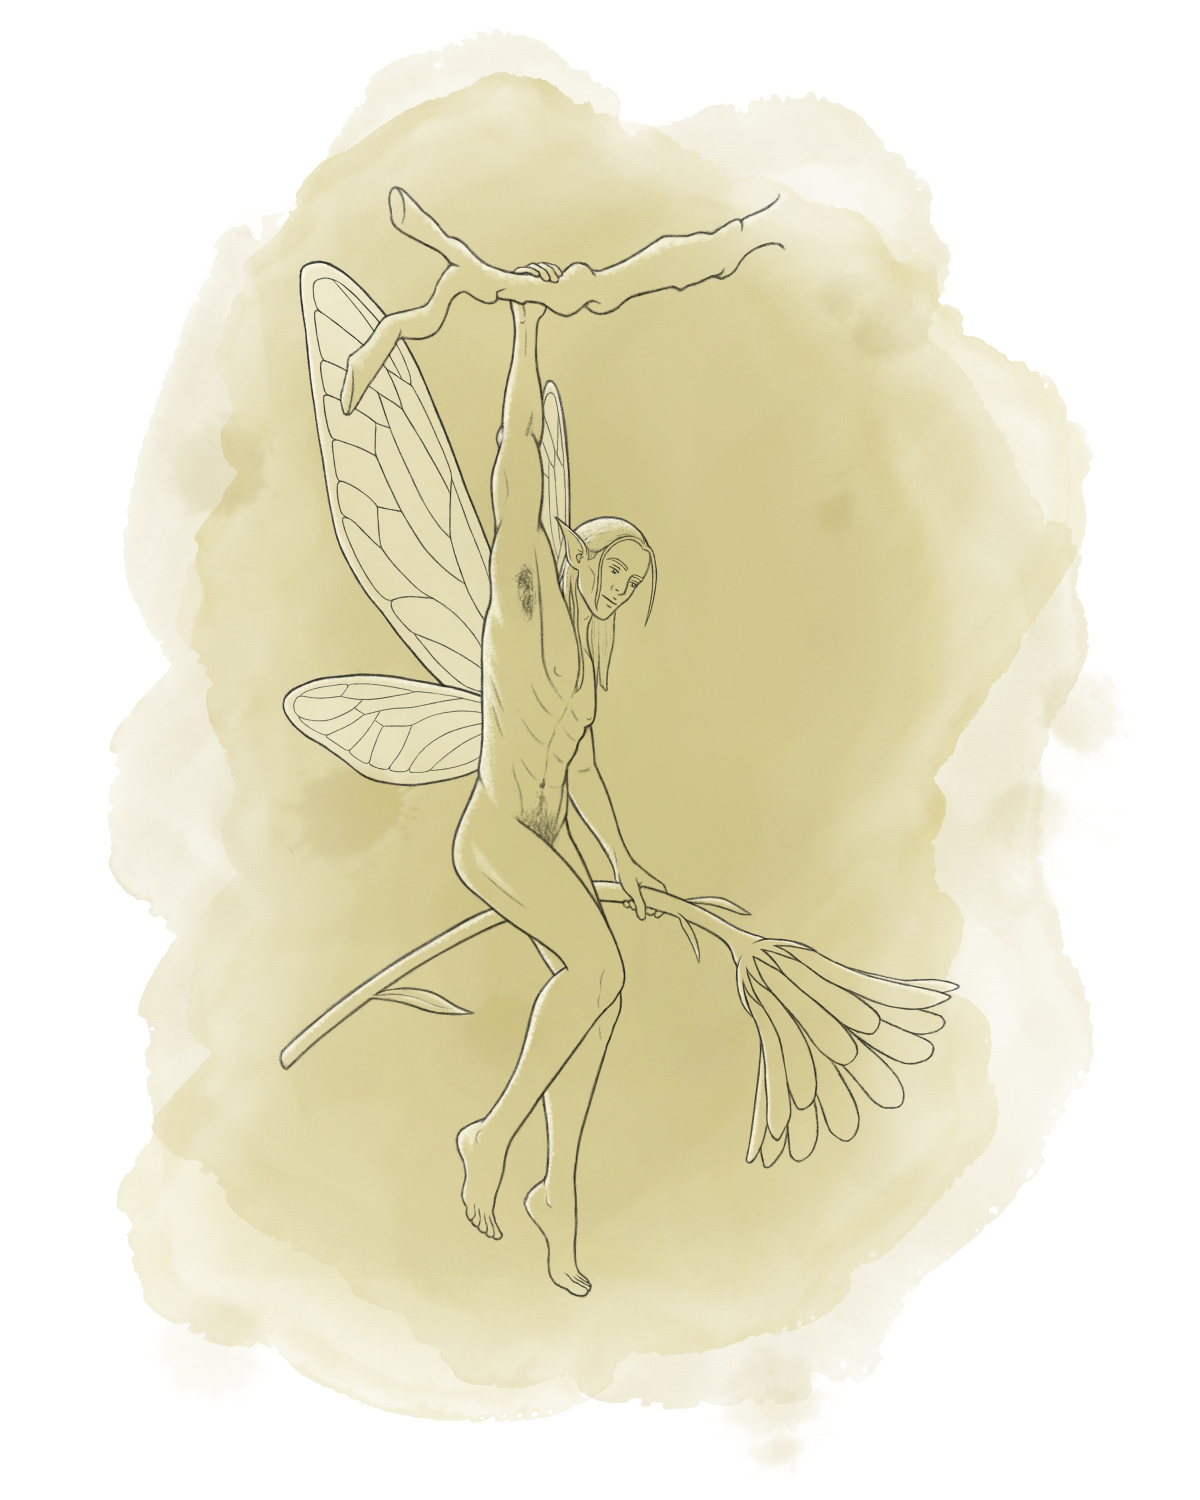 Drawing of a little winged pixie guy hanging from a branch, holding a flower as big as himself in his hand, with a splashy beige watercolor background.